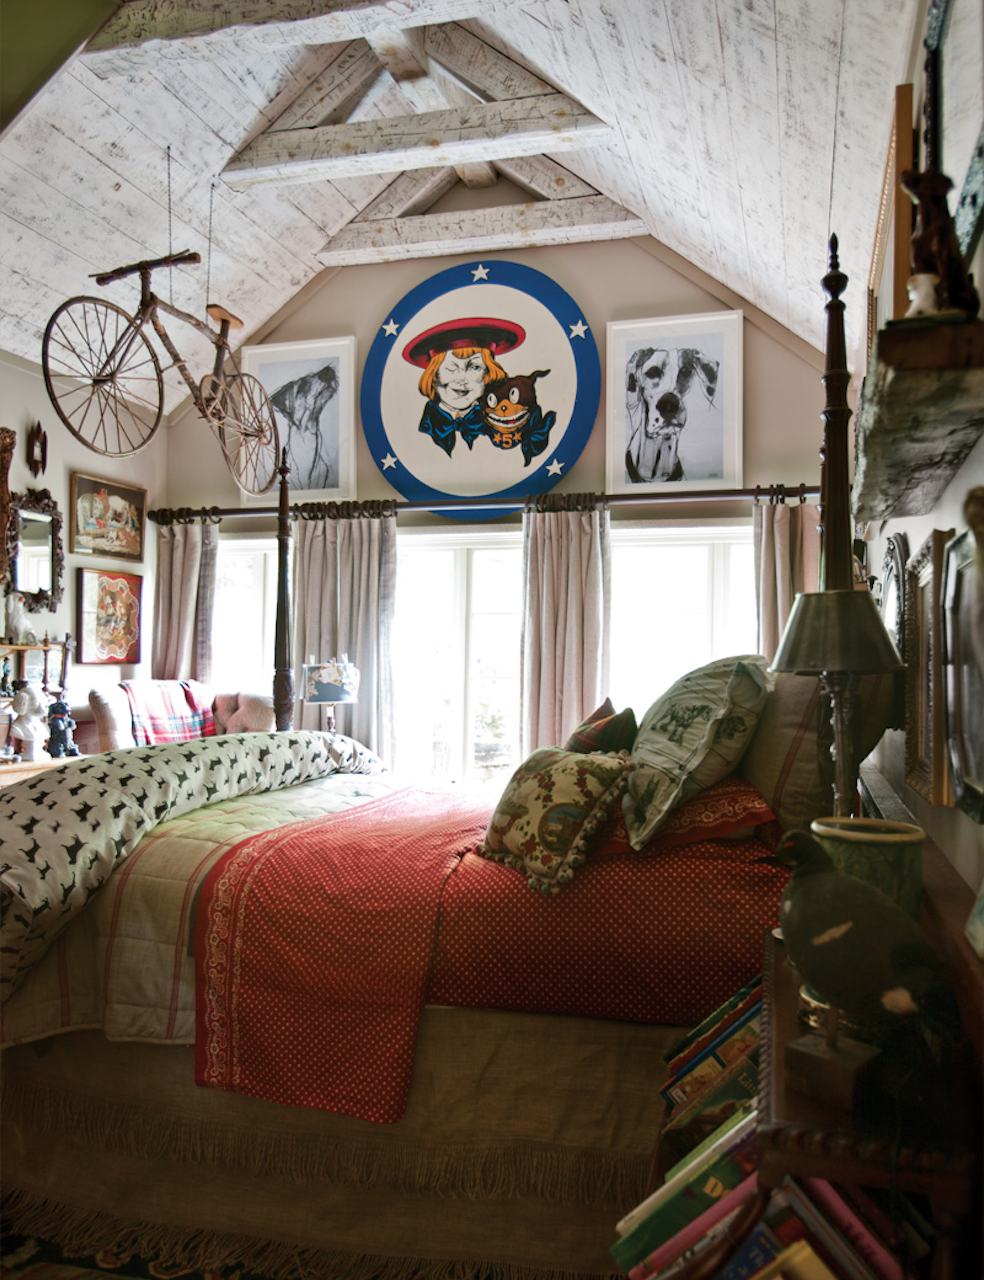 With canine collectibles, art, and textiles, this guest bedroom is a dog-lover’s delight. A mini library of children’s books beside the bed and whimsical accents such as the hanging bicycle make it a haven for kids as well.
